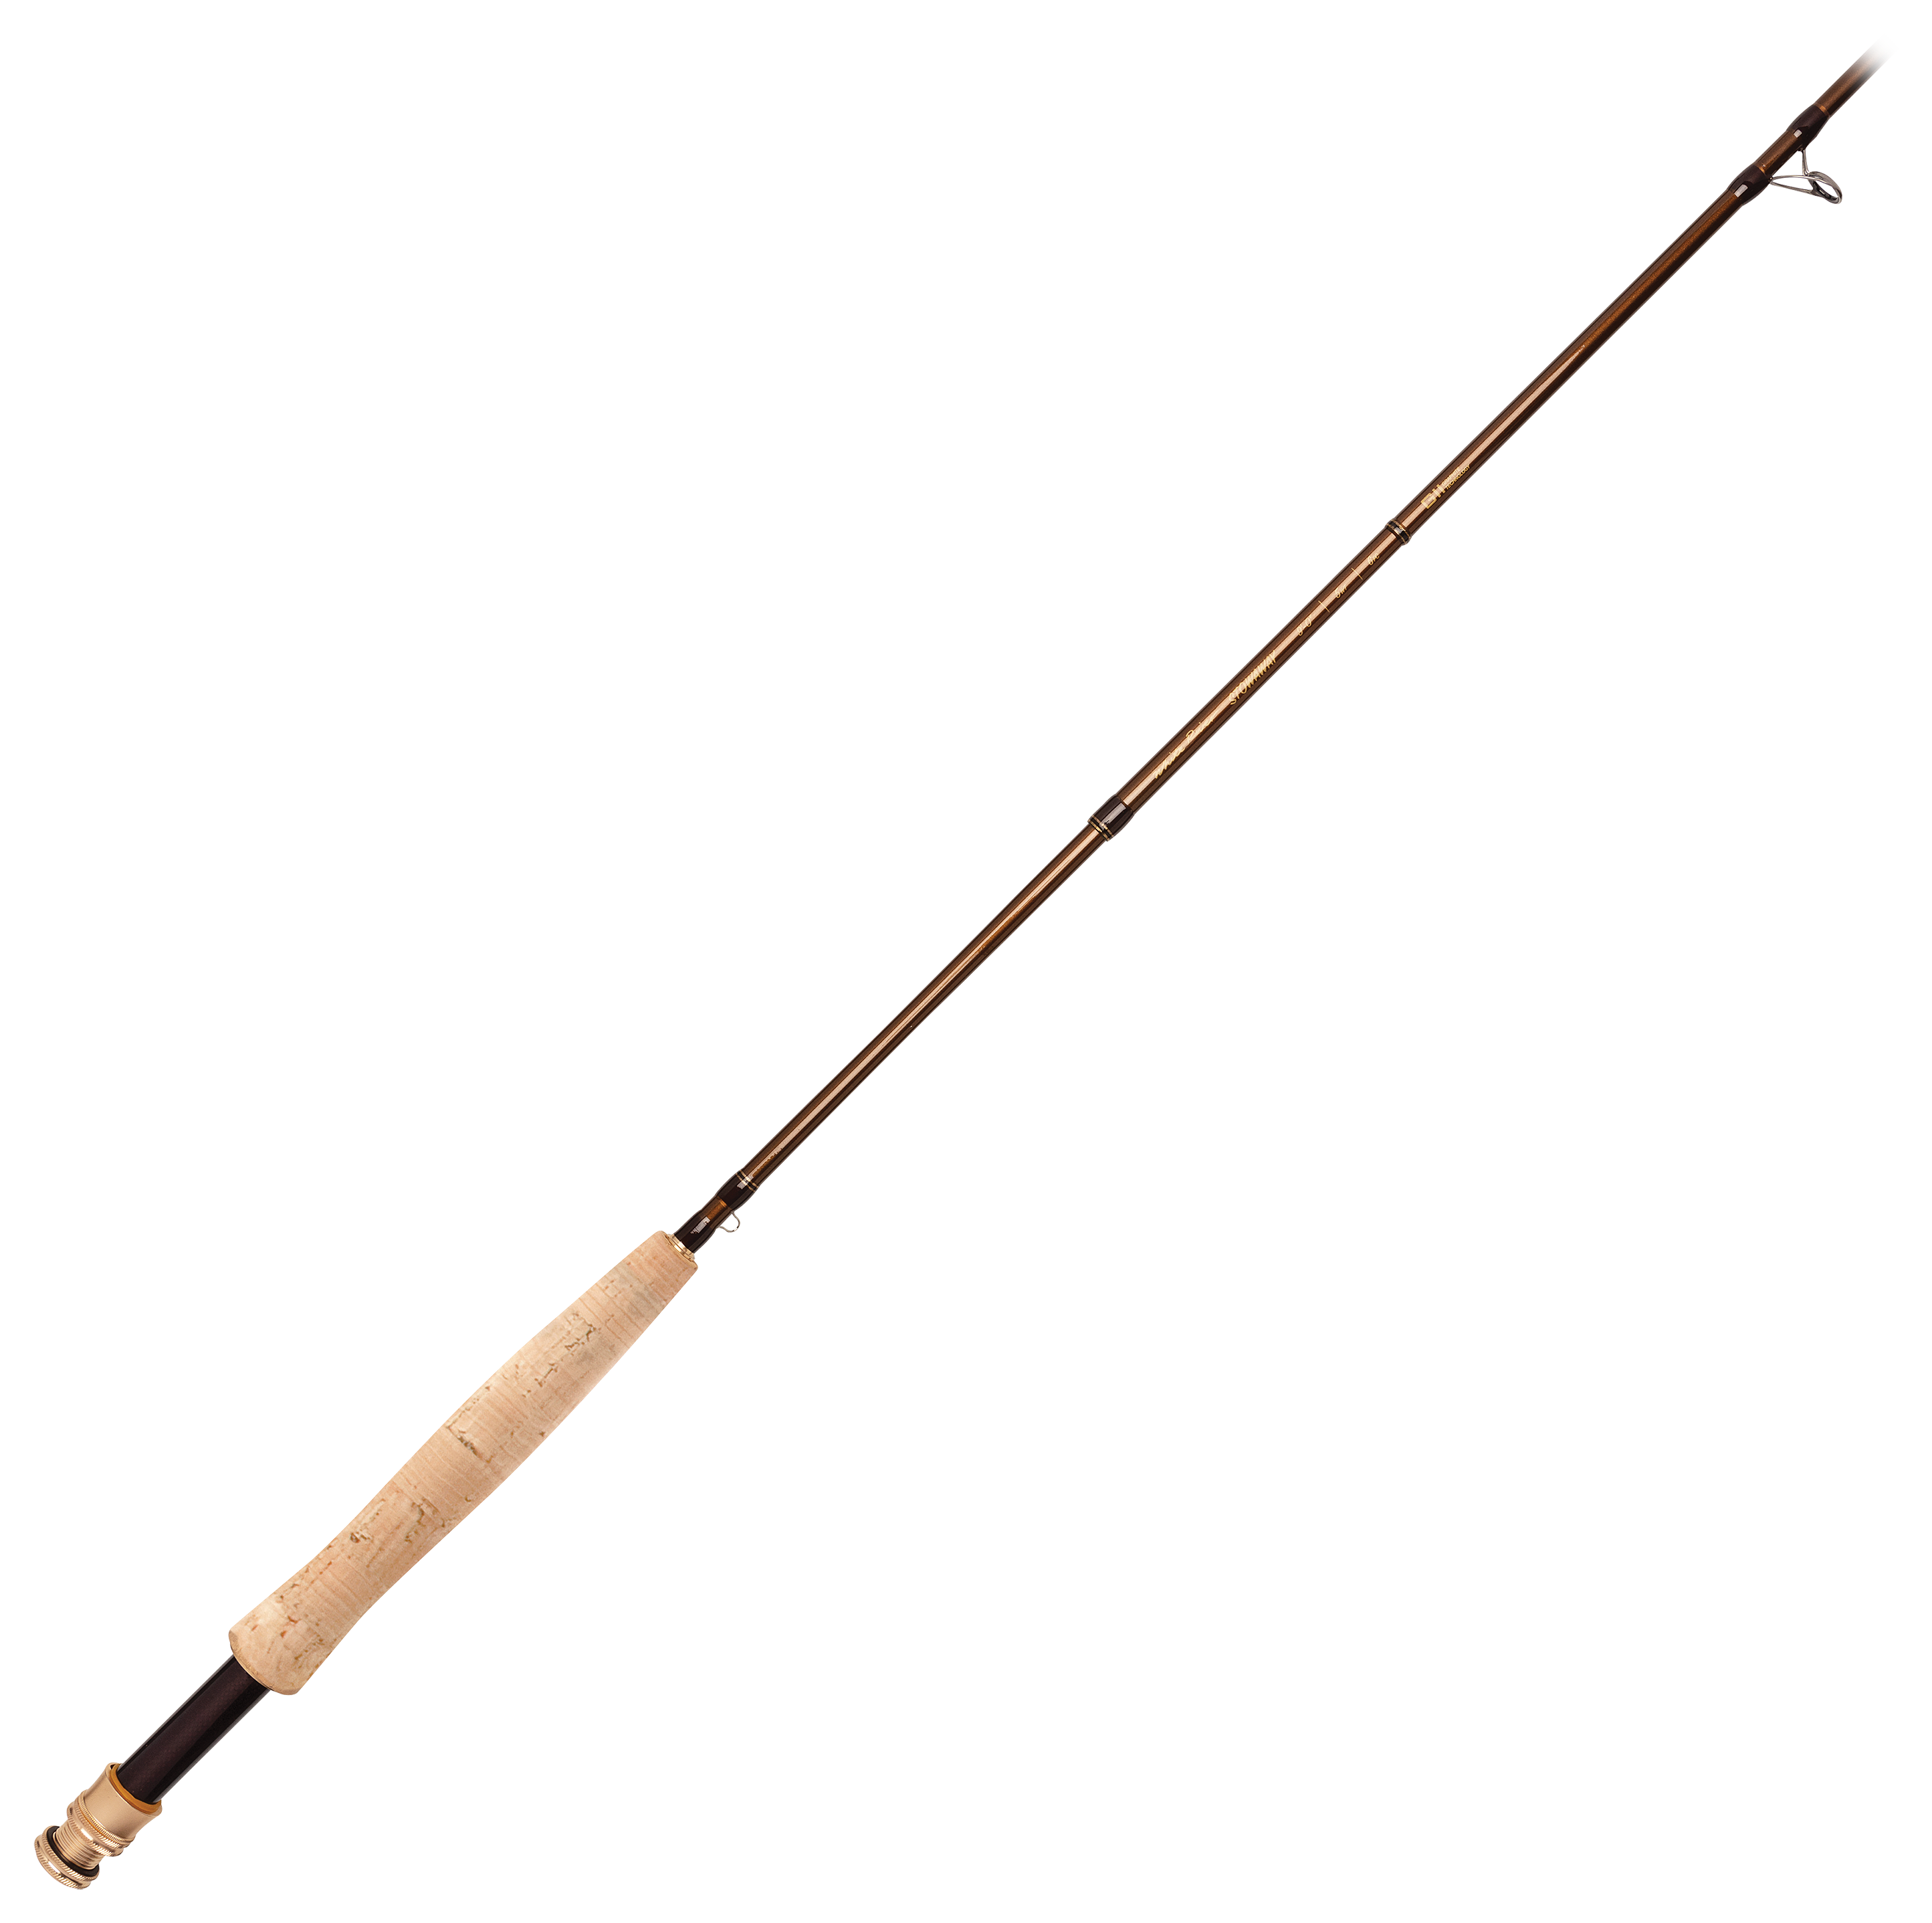 White River Fly Shop Stowaway Fly Rod - WRST905-6